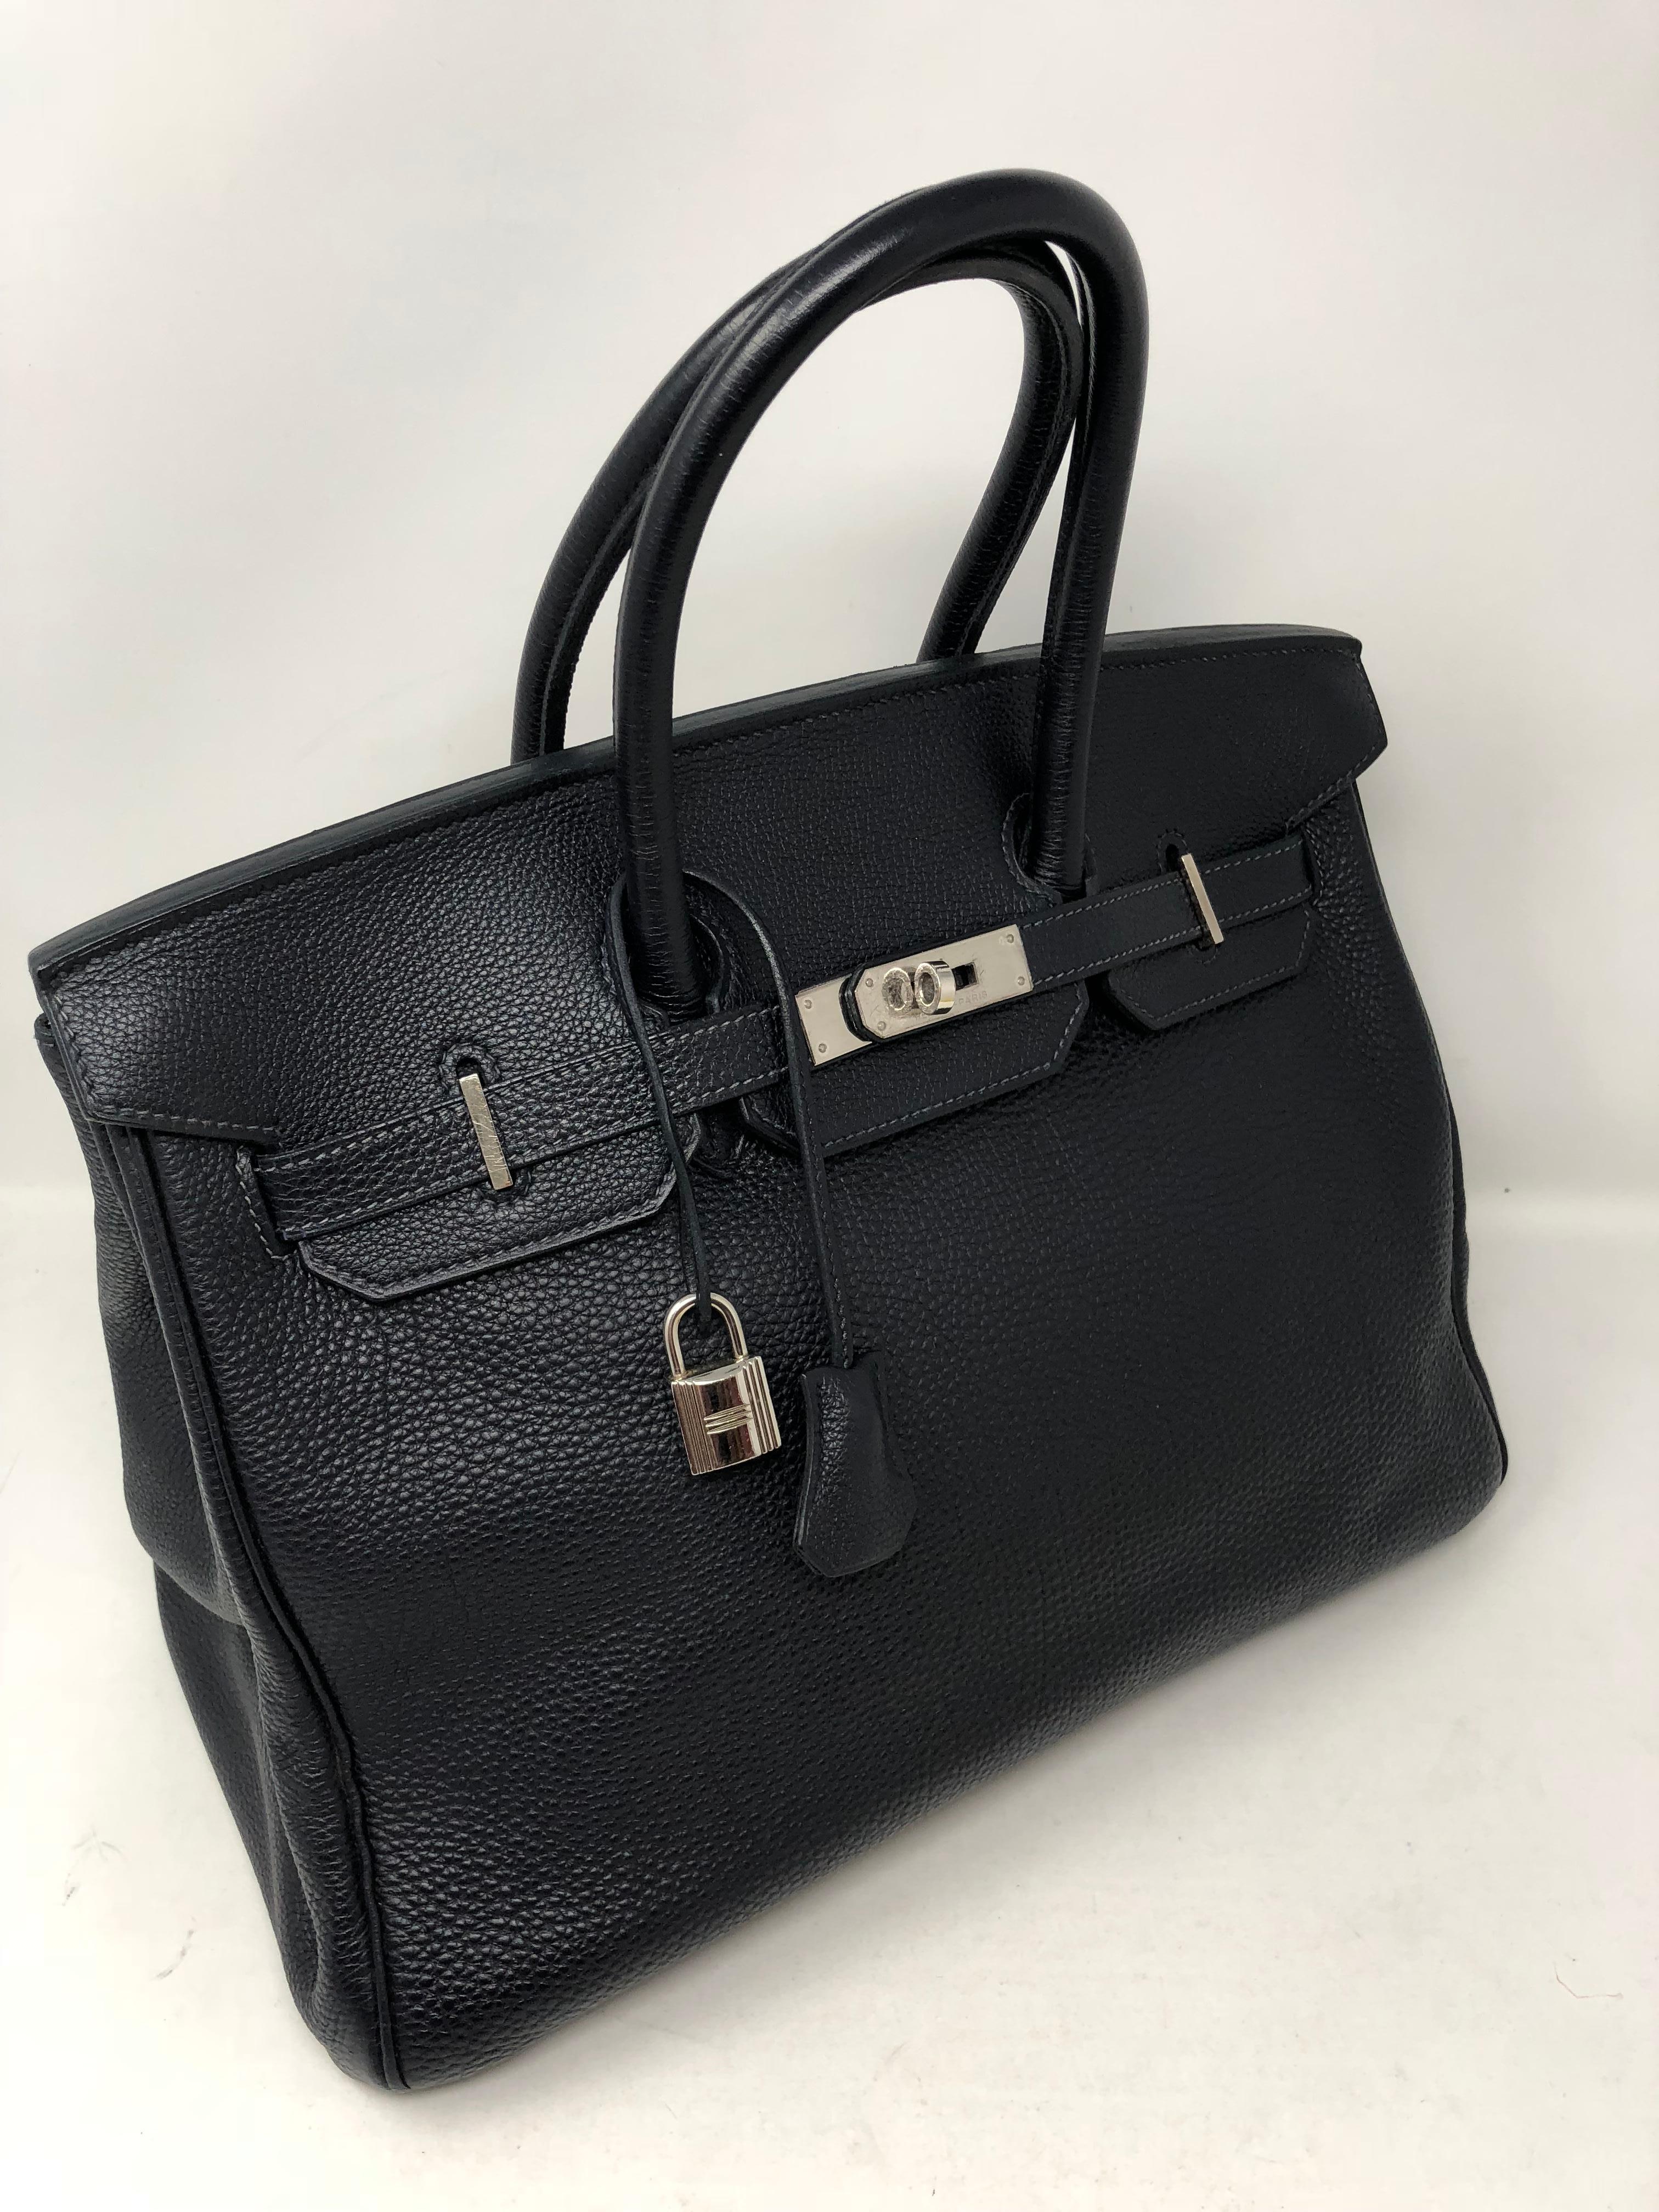 Hermes Black Birkin 35 togo leather with palladium hardware. Good condition. Bag includes dust cover, clochette, lock and keys. Guaranteed authentic. 